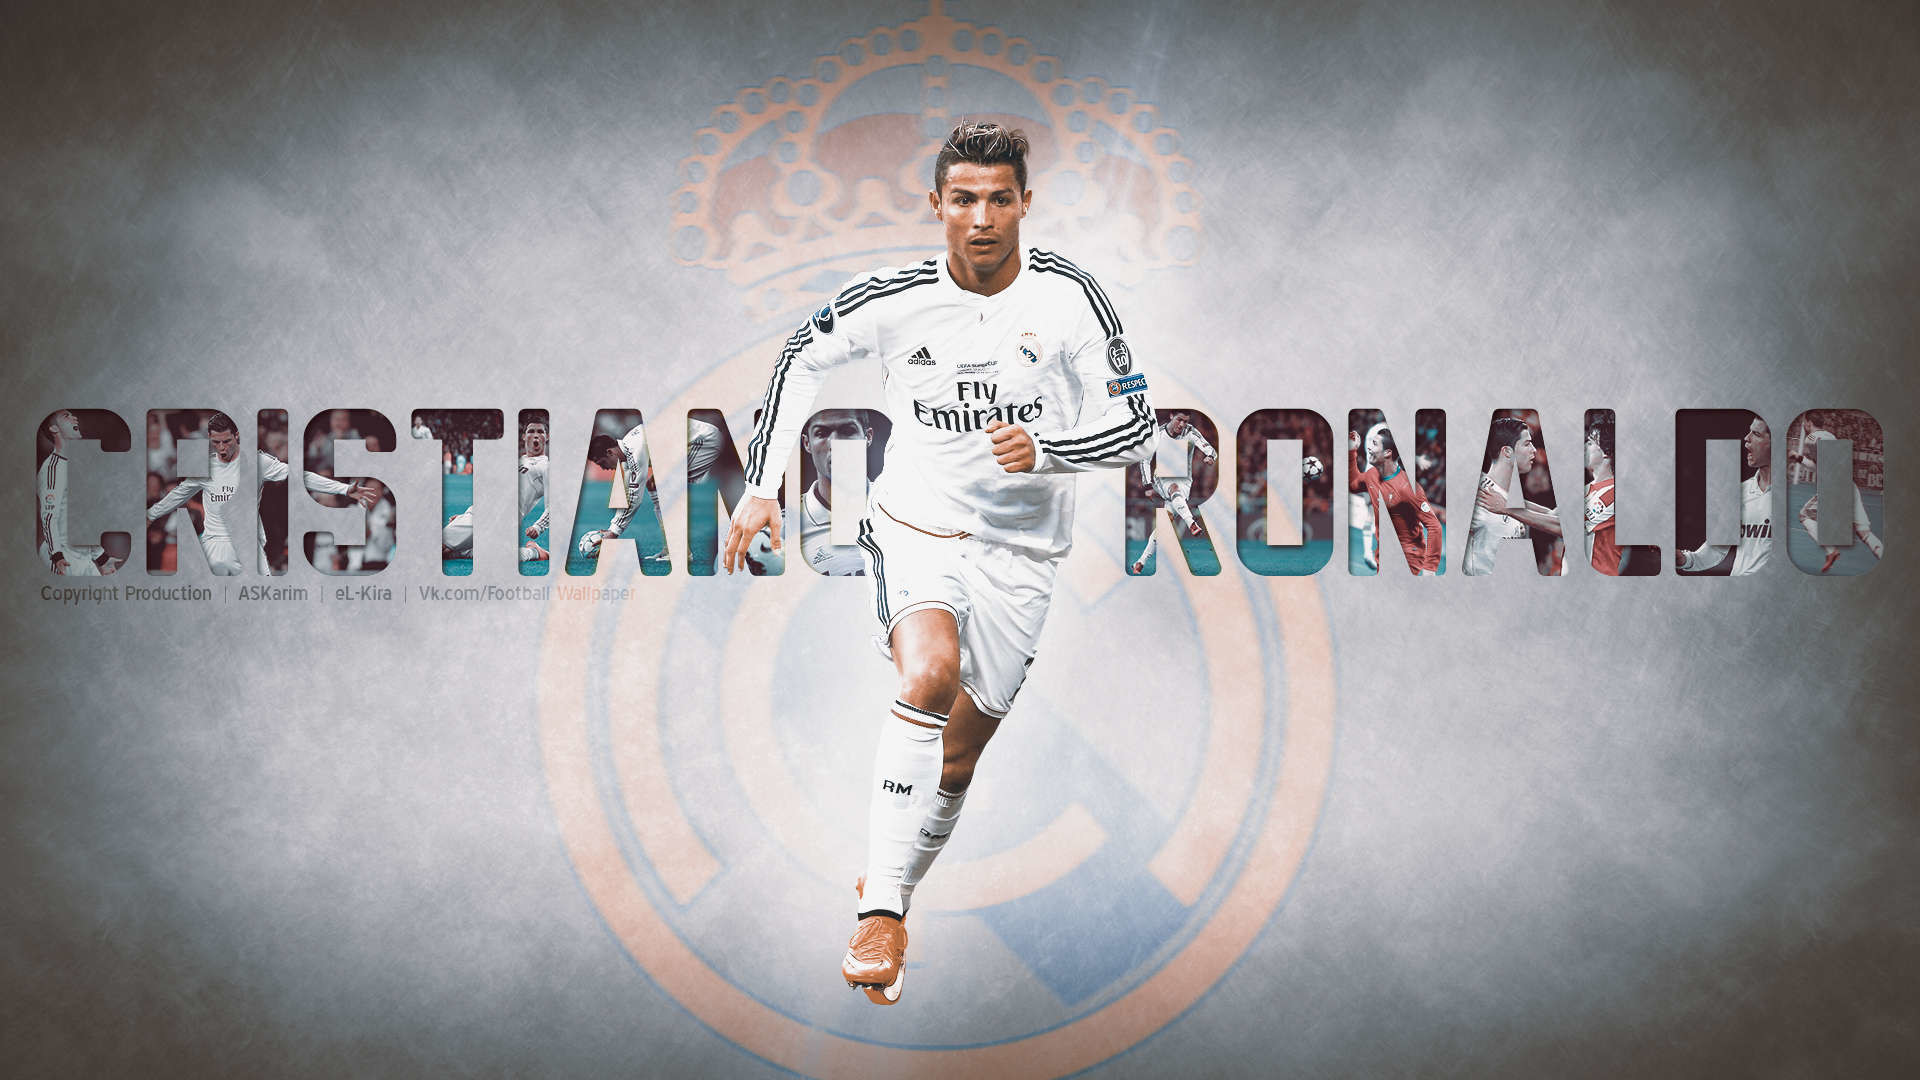 Cristiano Ronaldo 2016 Wallpaper – HD Wallpapers Backgrounds of Your